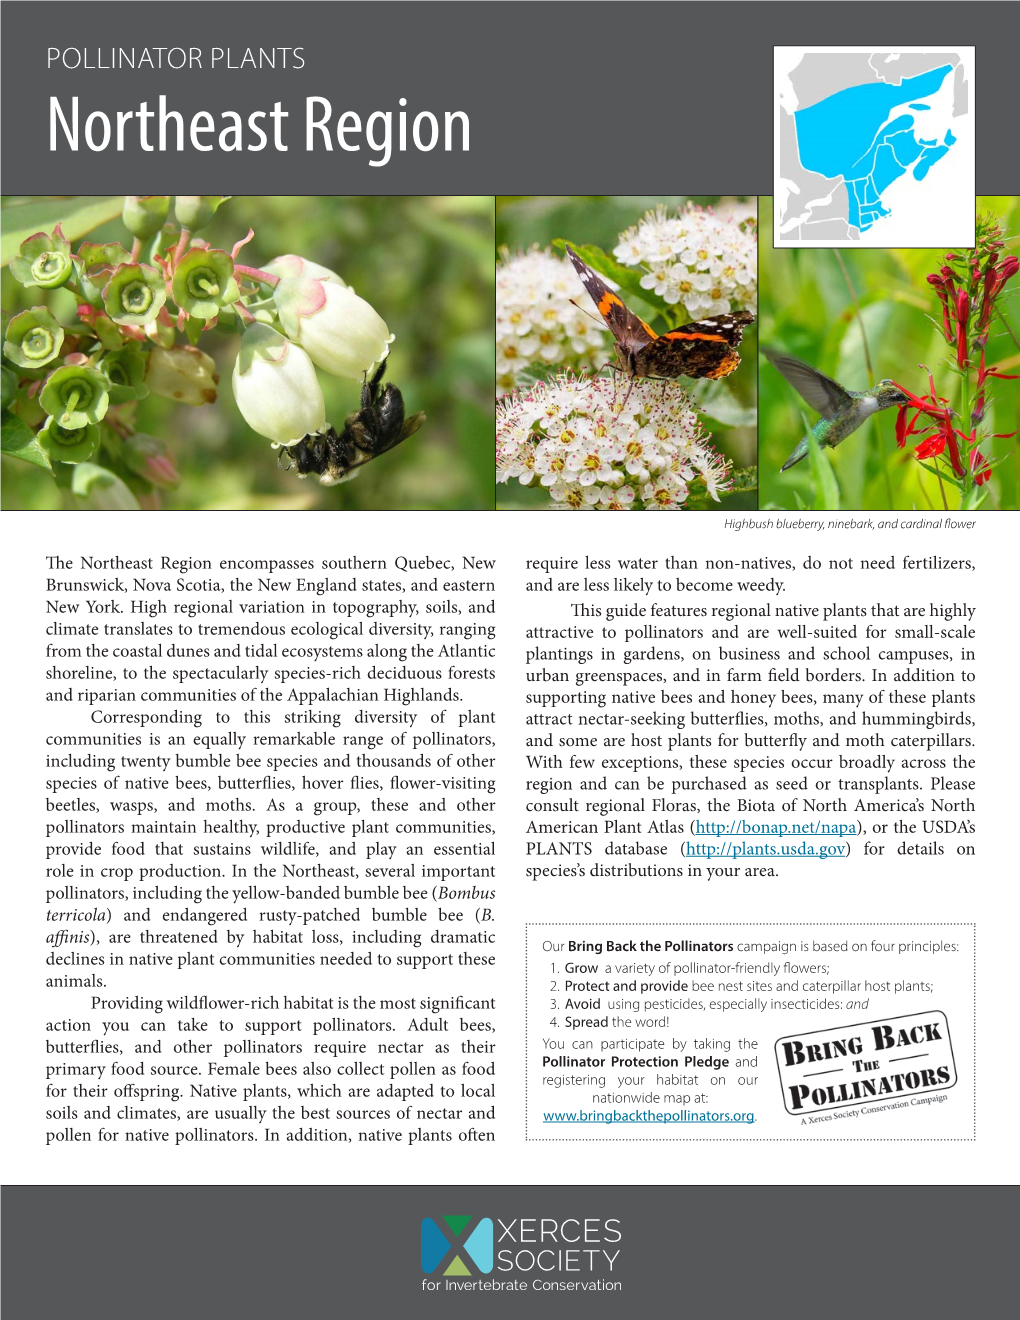 Pollinator Plants for the Northeast Region Was Produced by the Xerces® Society